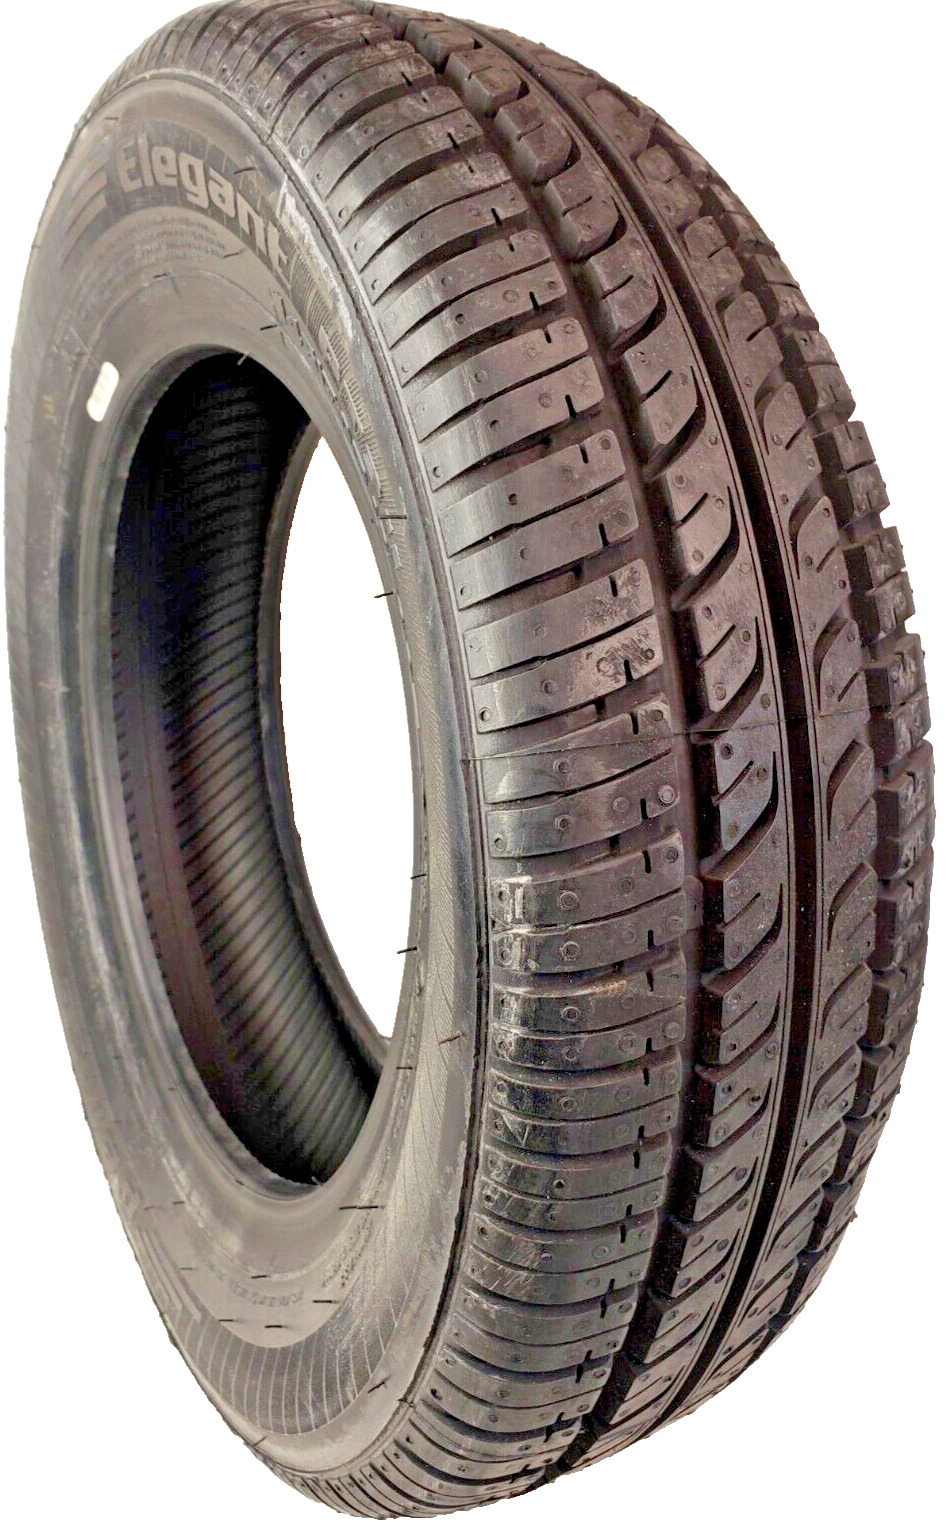 Mini Truck Tire P145/70R-12 145/70R-12 145/70-12 Steel Belted Radial replacement